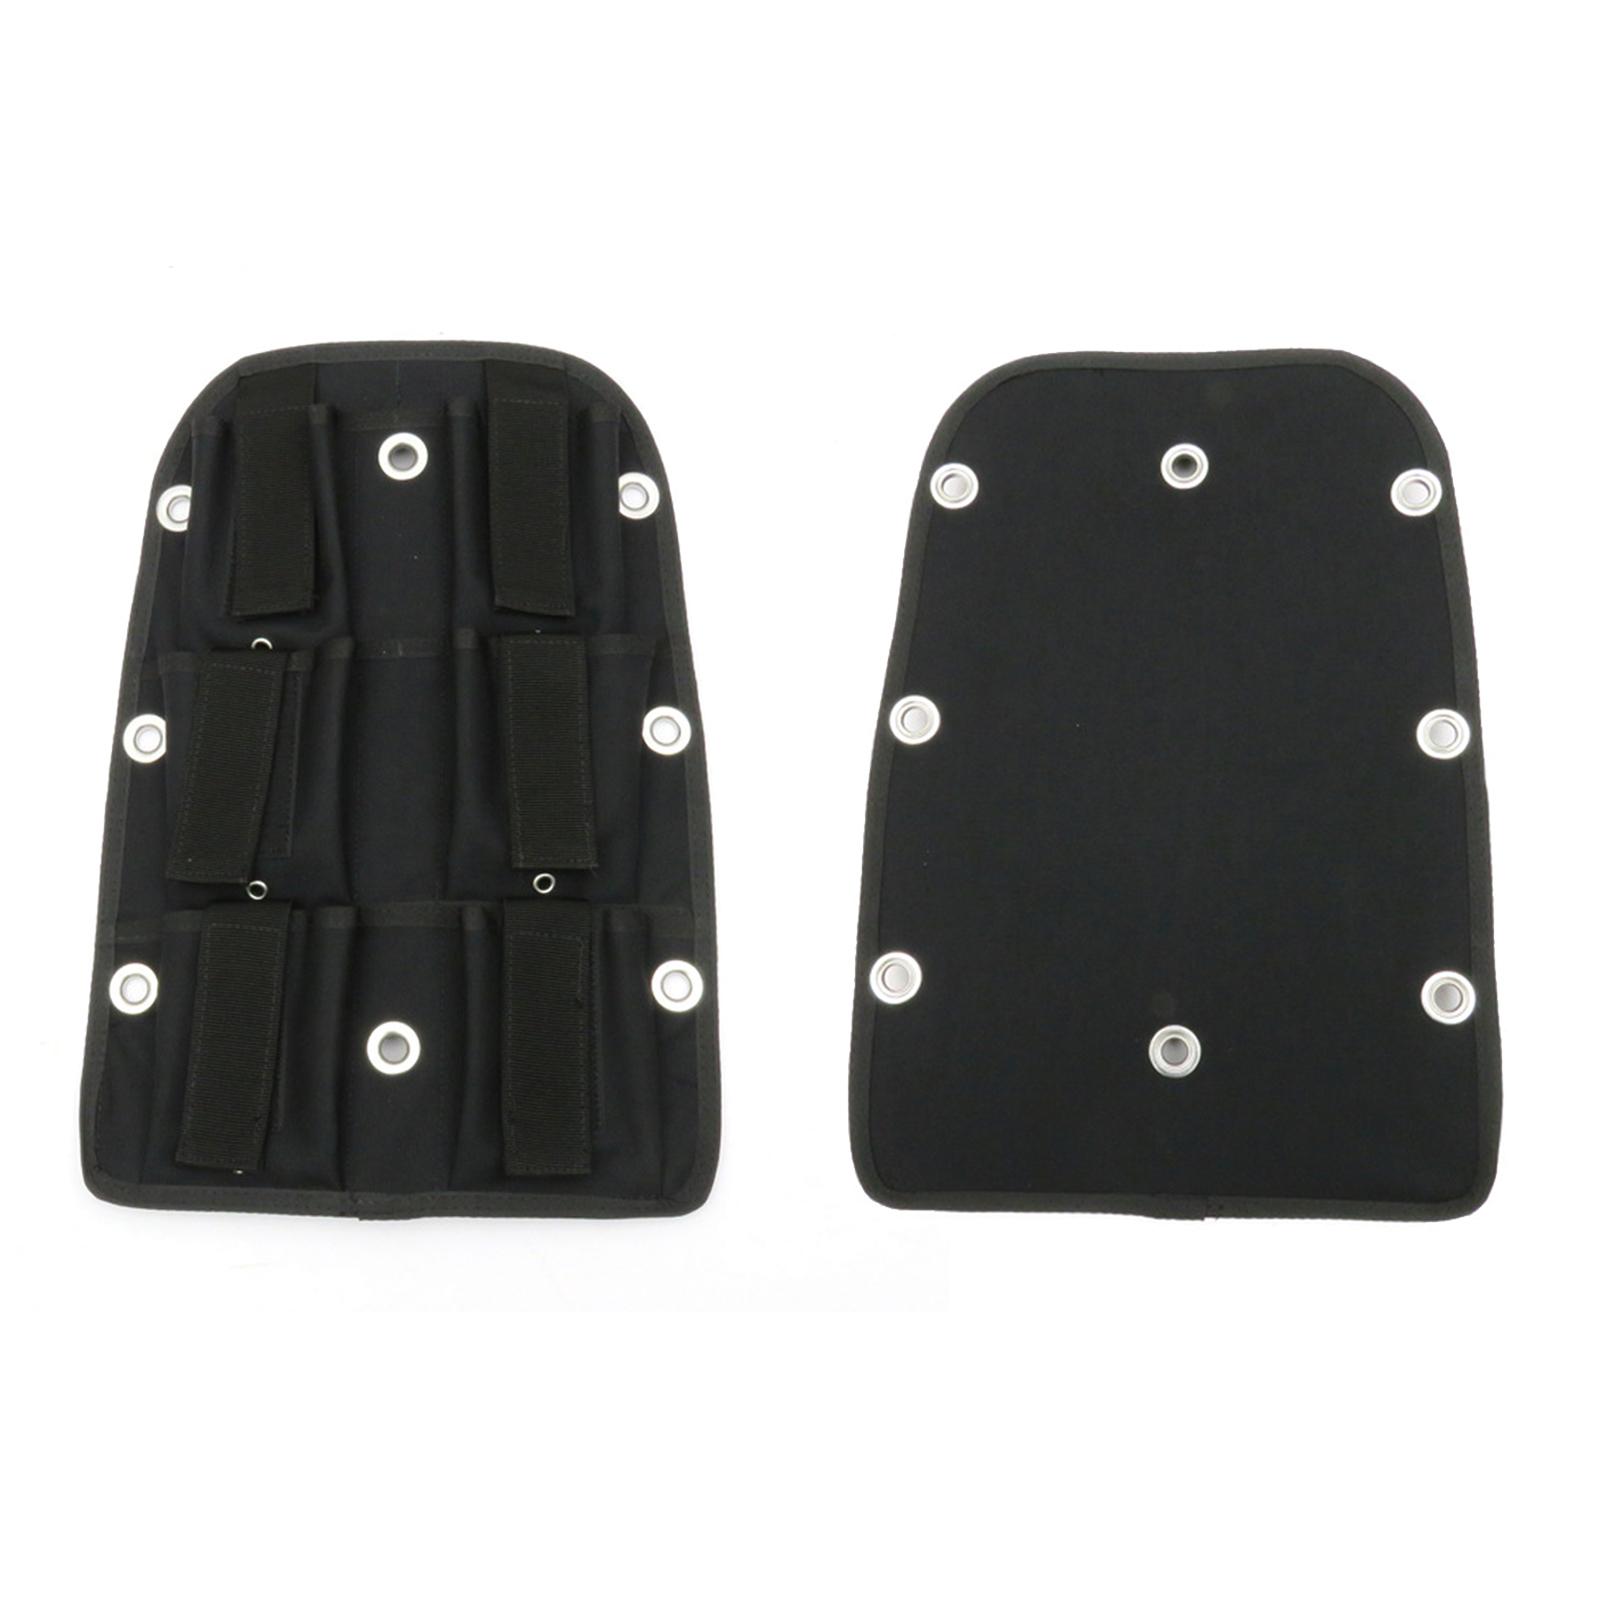 Diving Backplate Harness 13lbs Weight Plate Dry Suit Carrier Cushion Pad